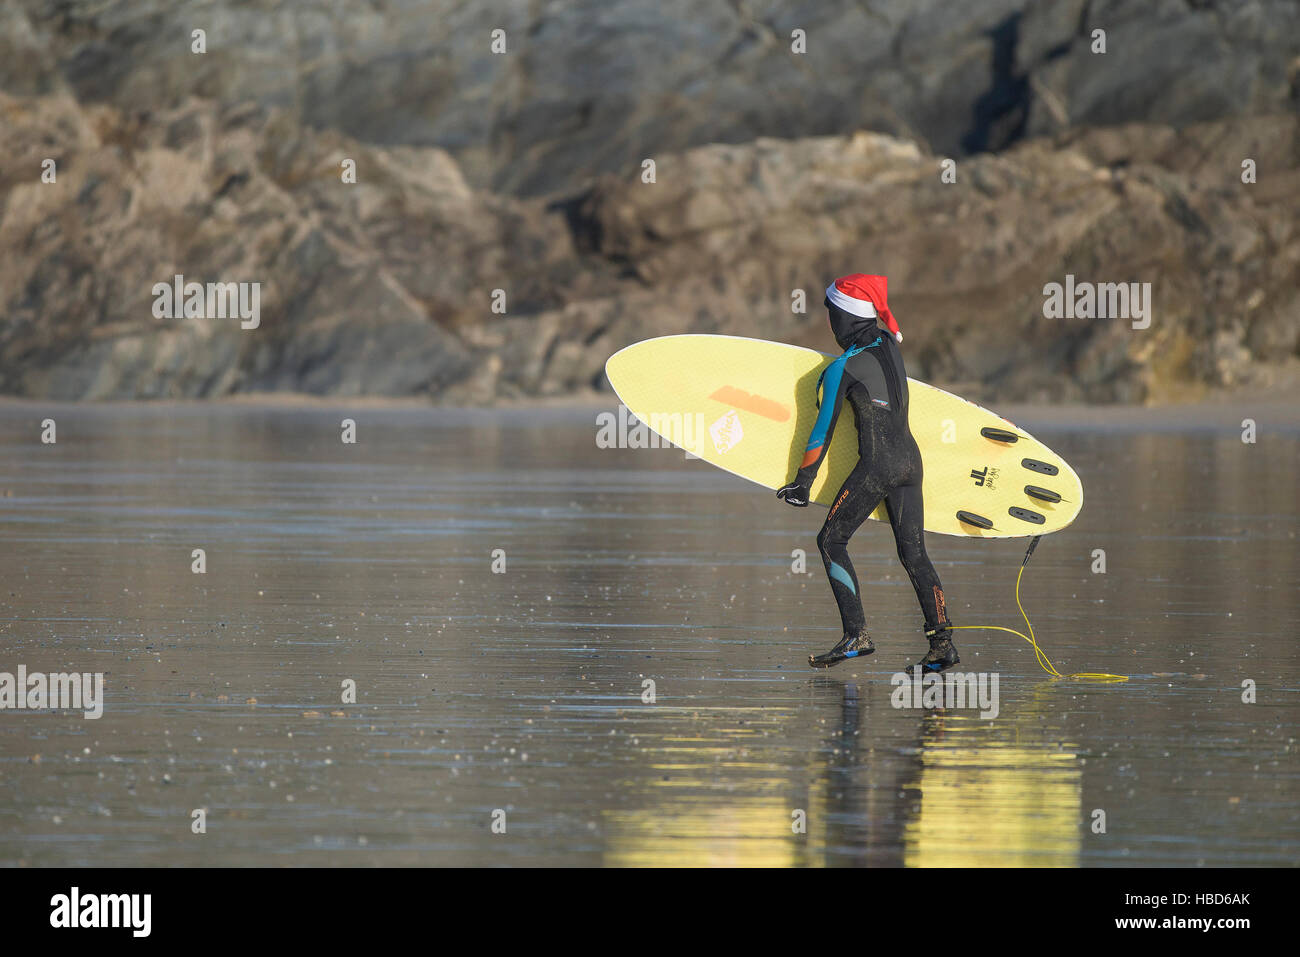 A young surfer wears a Santa hat on a very chilly Fistral Beach in Newquay, Cornwall.   Stock Photo